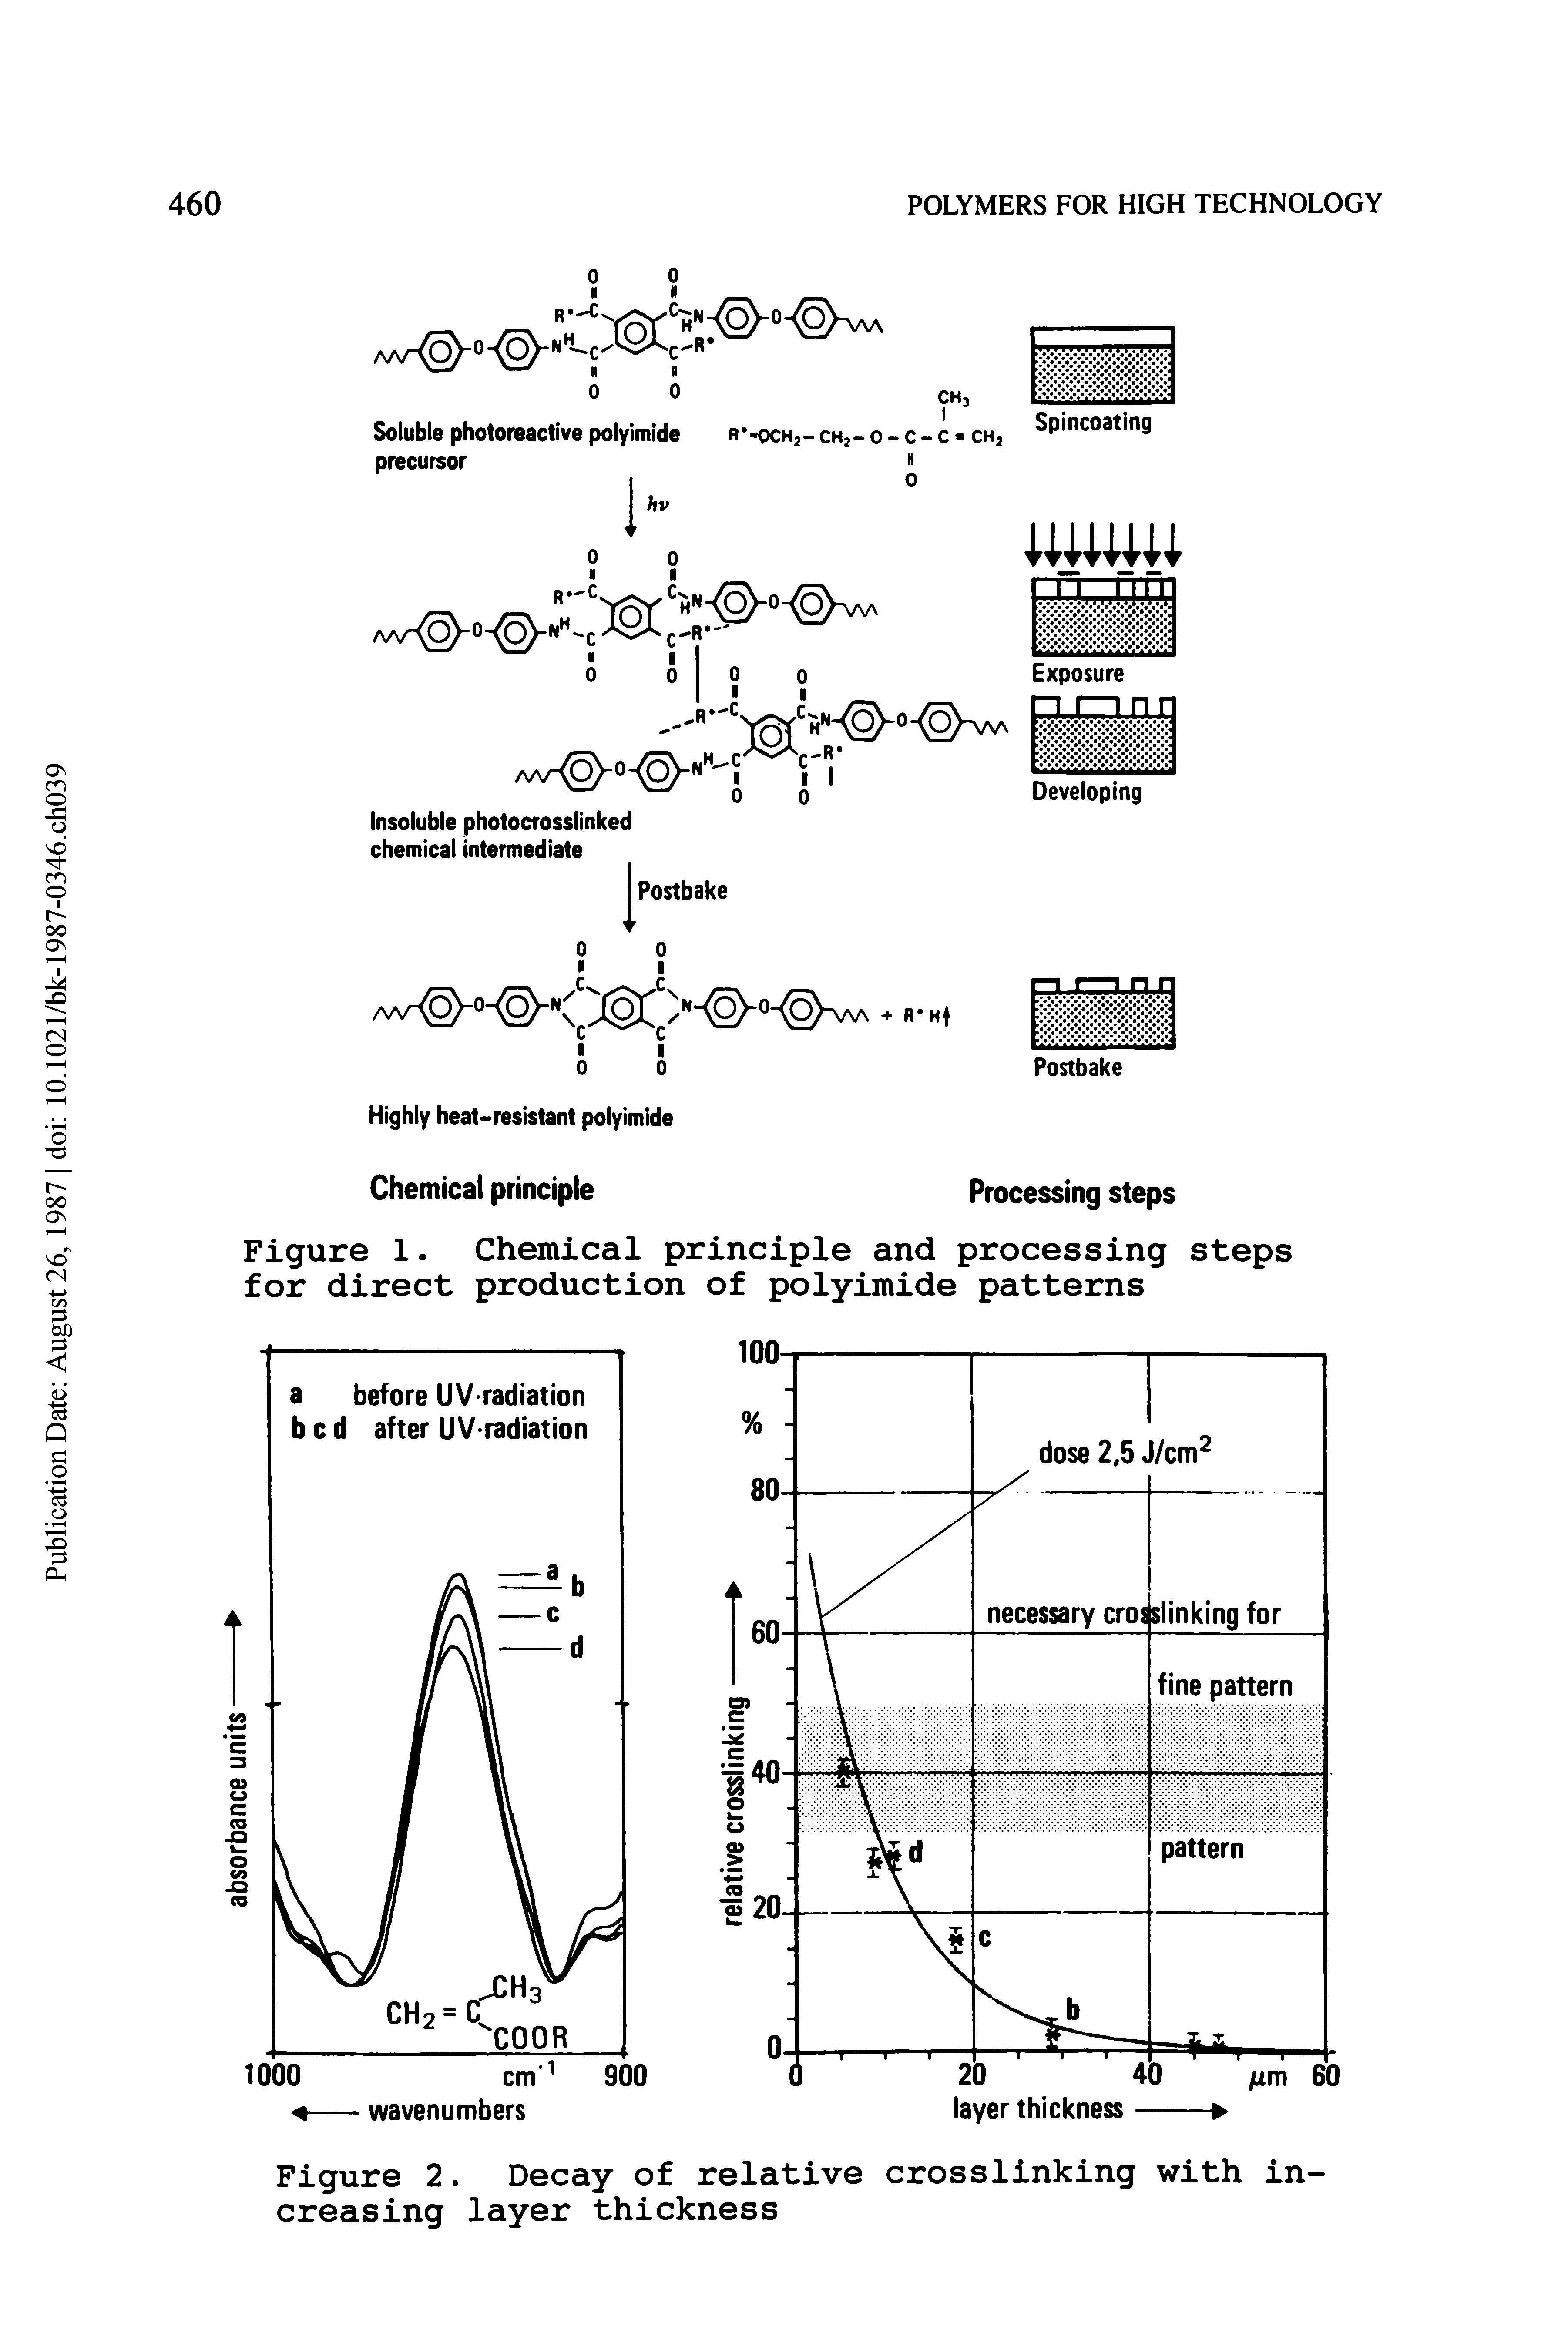 Figure 1. Chemical principle and processing steps for direct production of polyimide patterns...